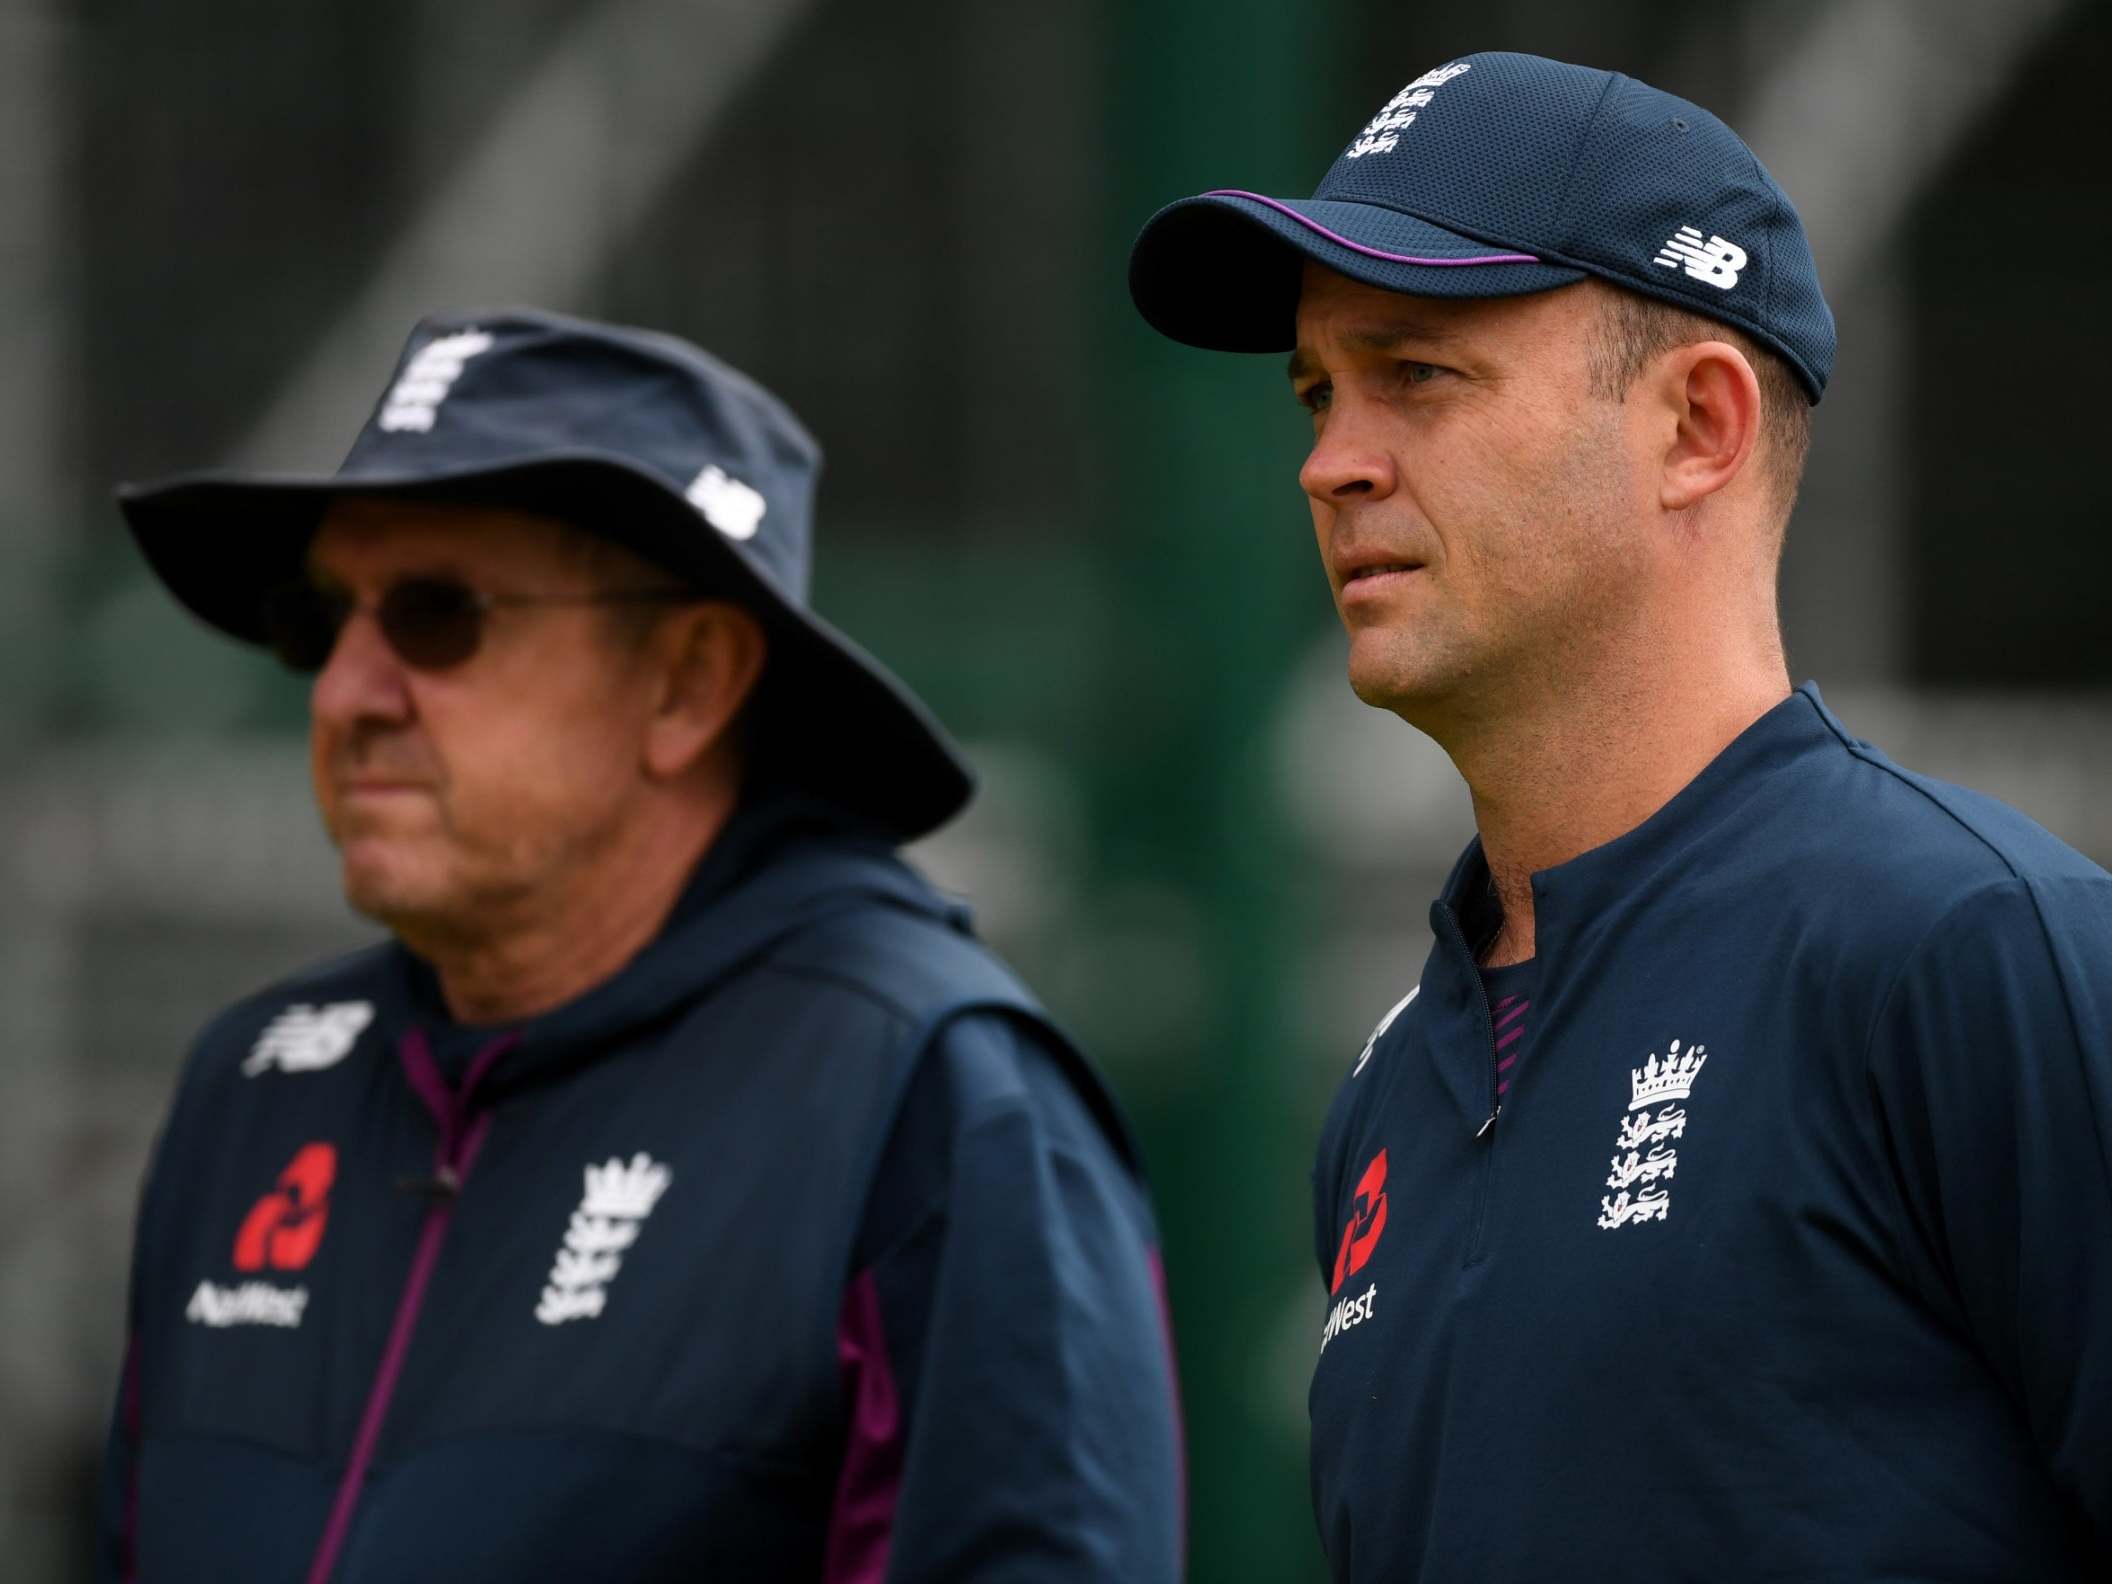 Trevor Bayliss and Jonathan Trott before the fourth Ashes Test